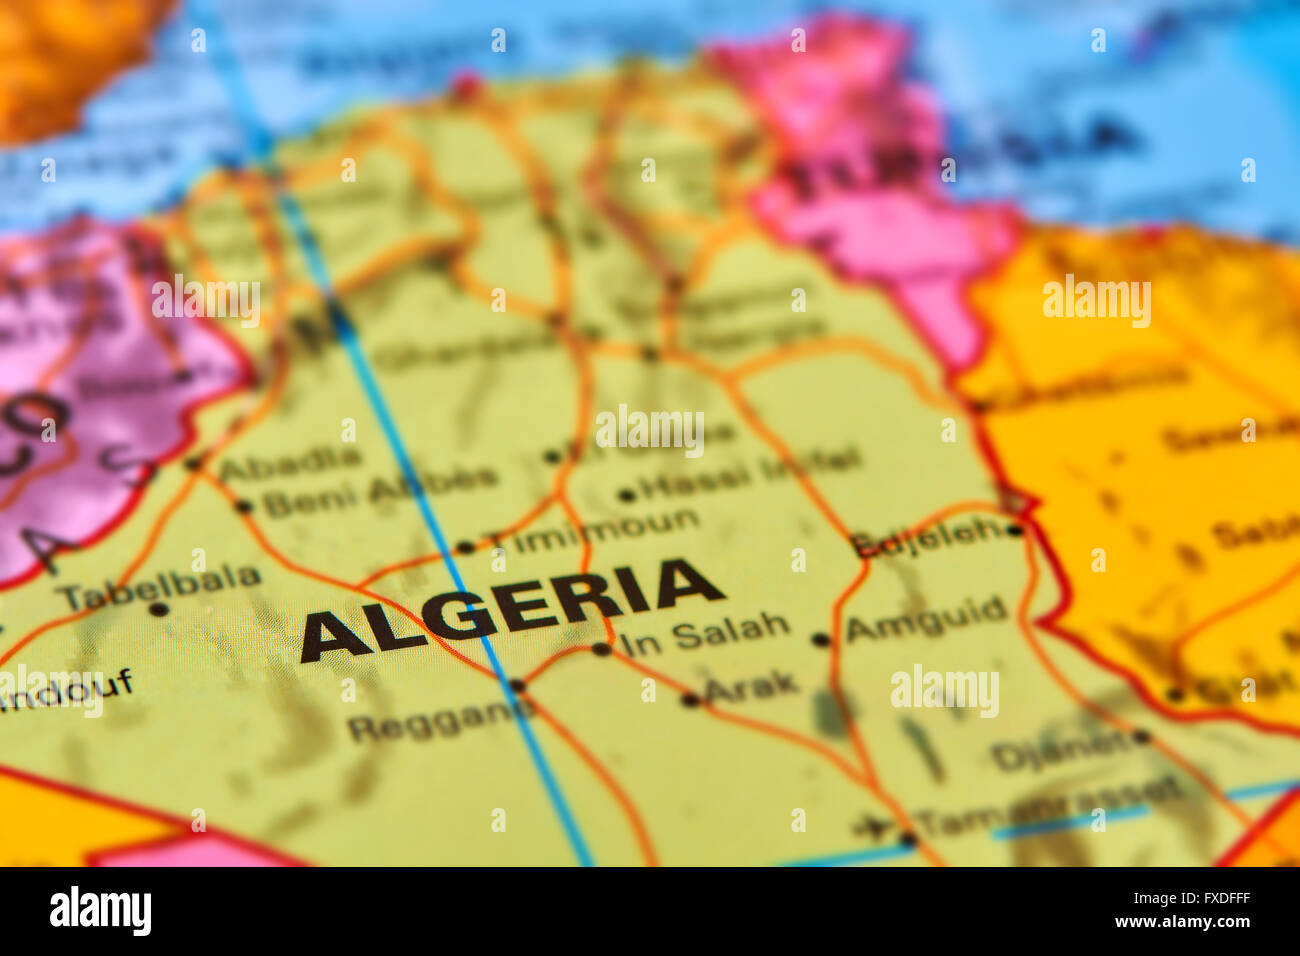 Algeria Country in Africa on the World Map Stock Photo